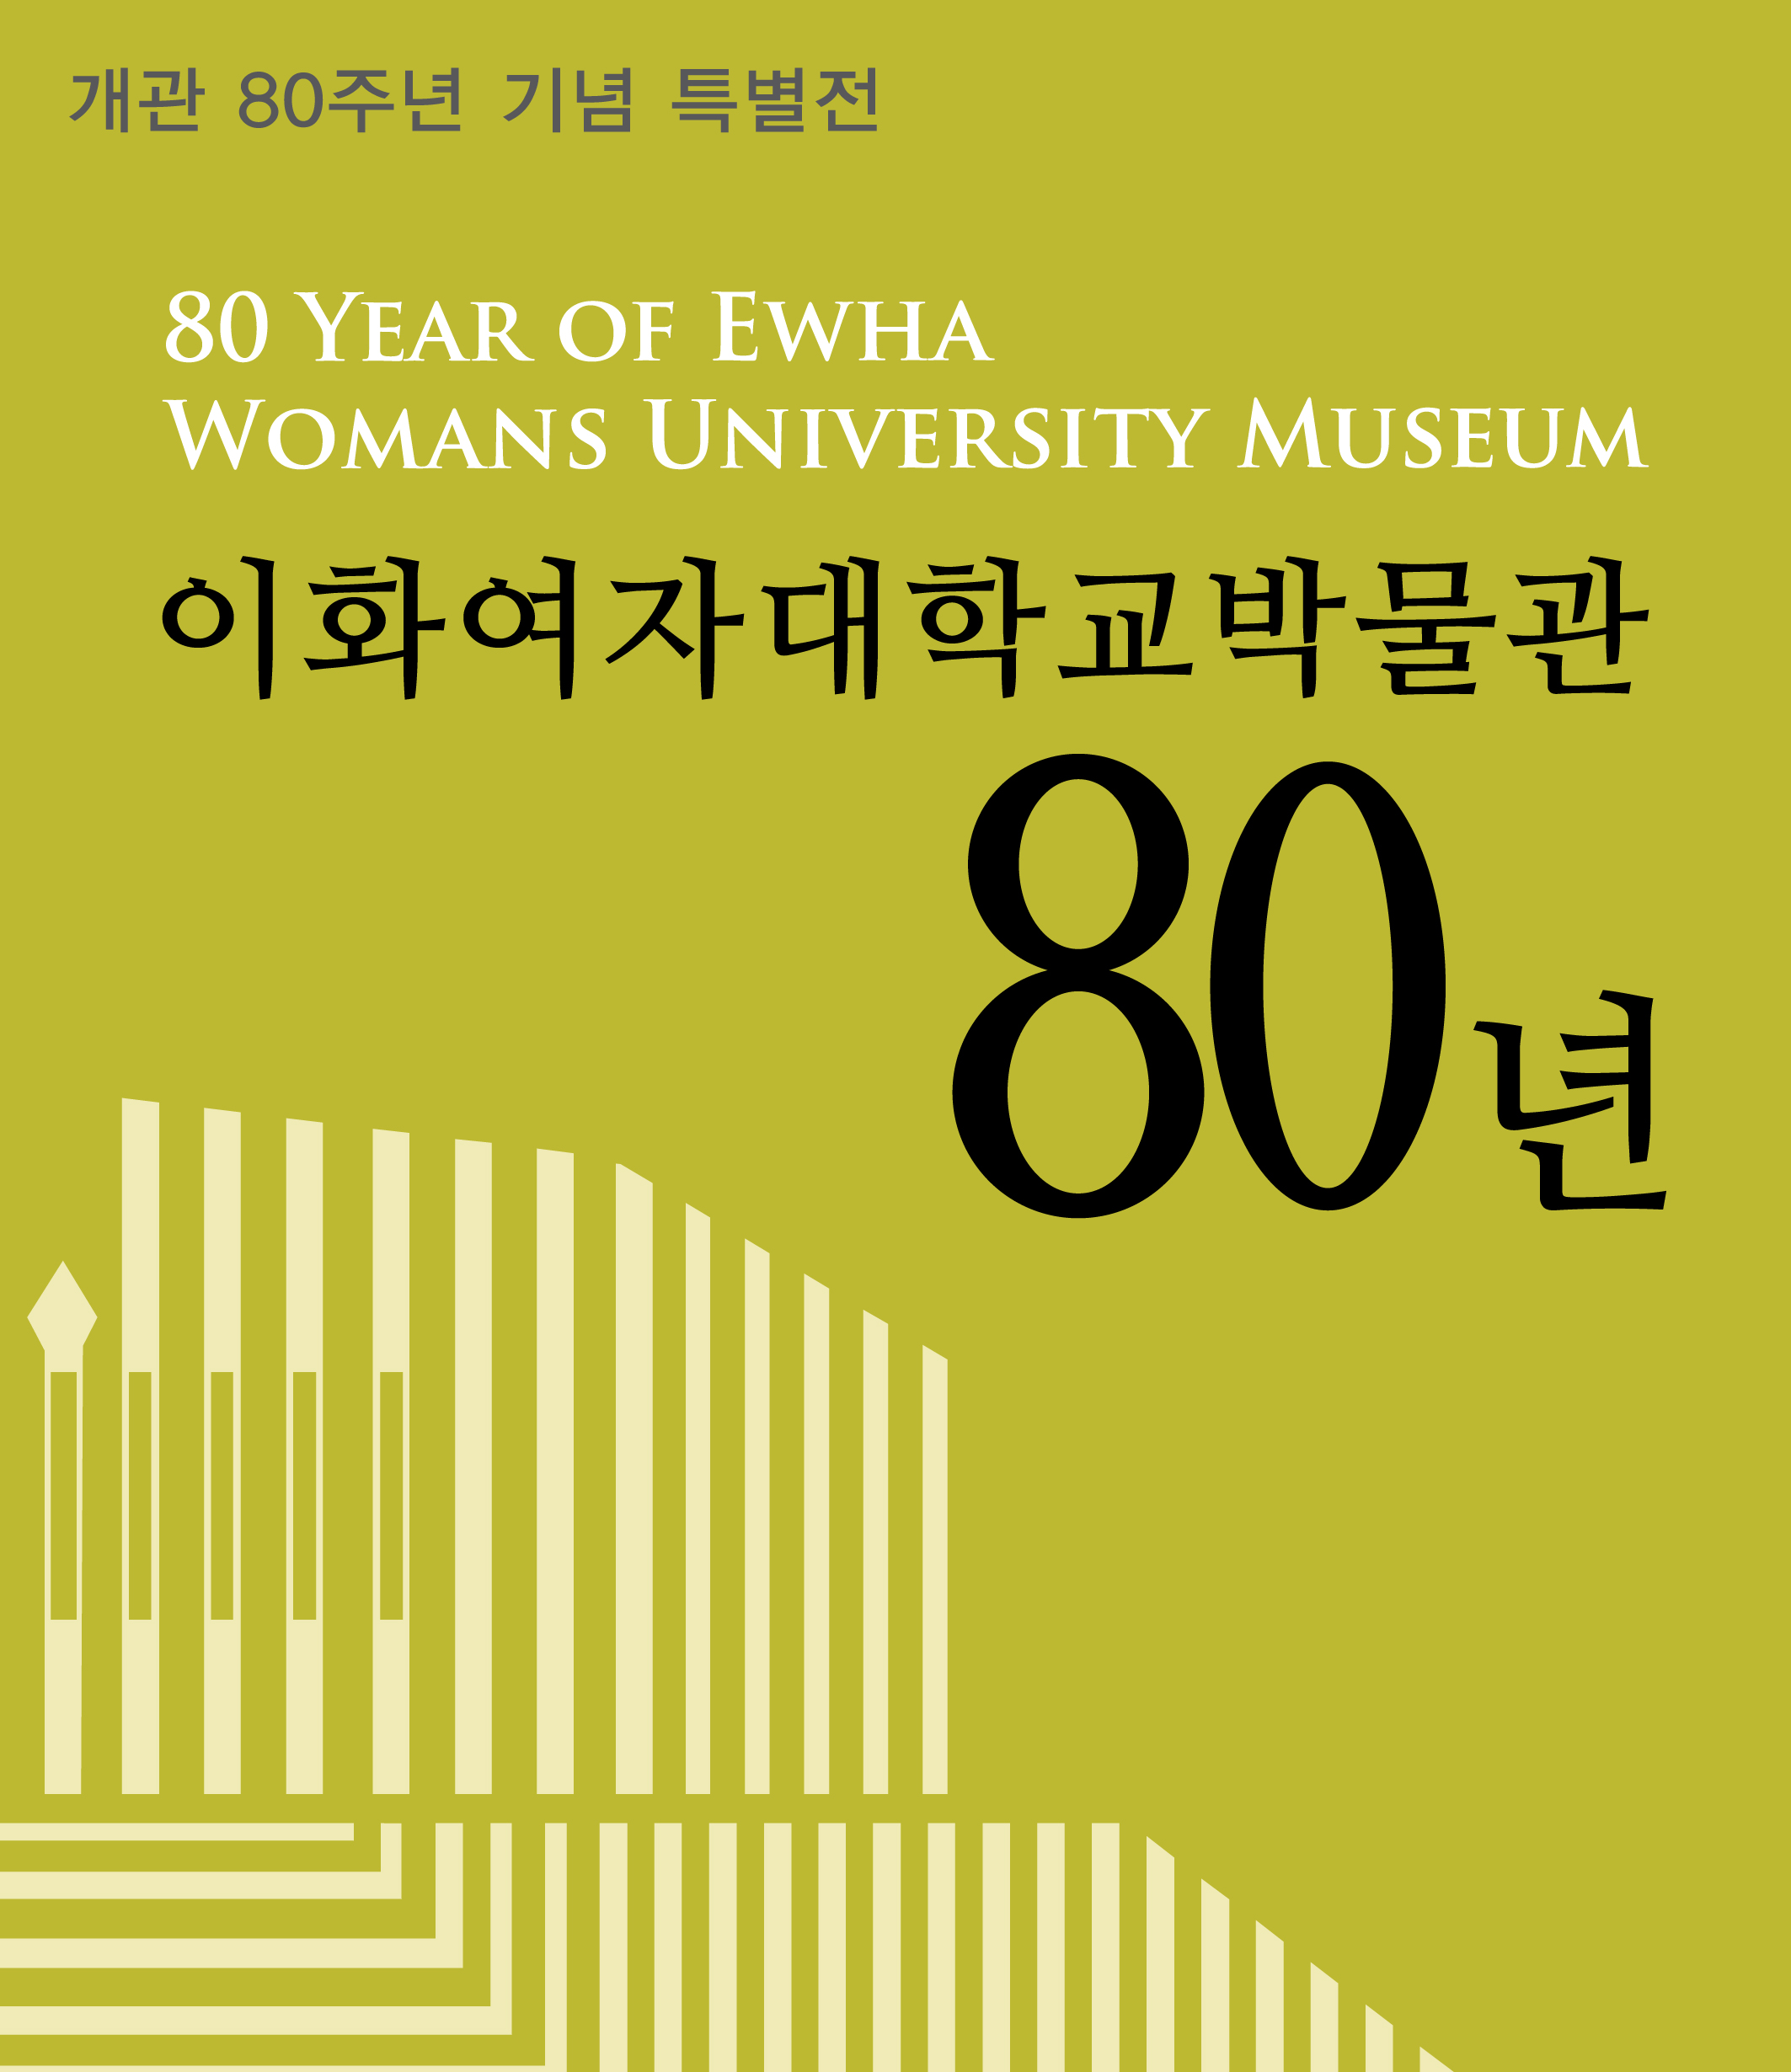 80 Years of Ewha Womans University Museum